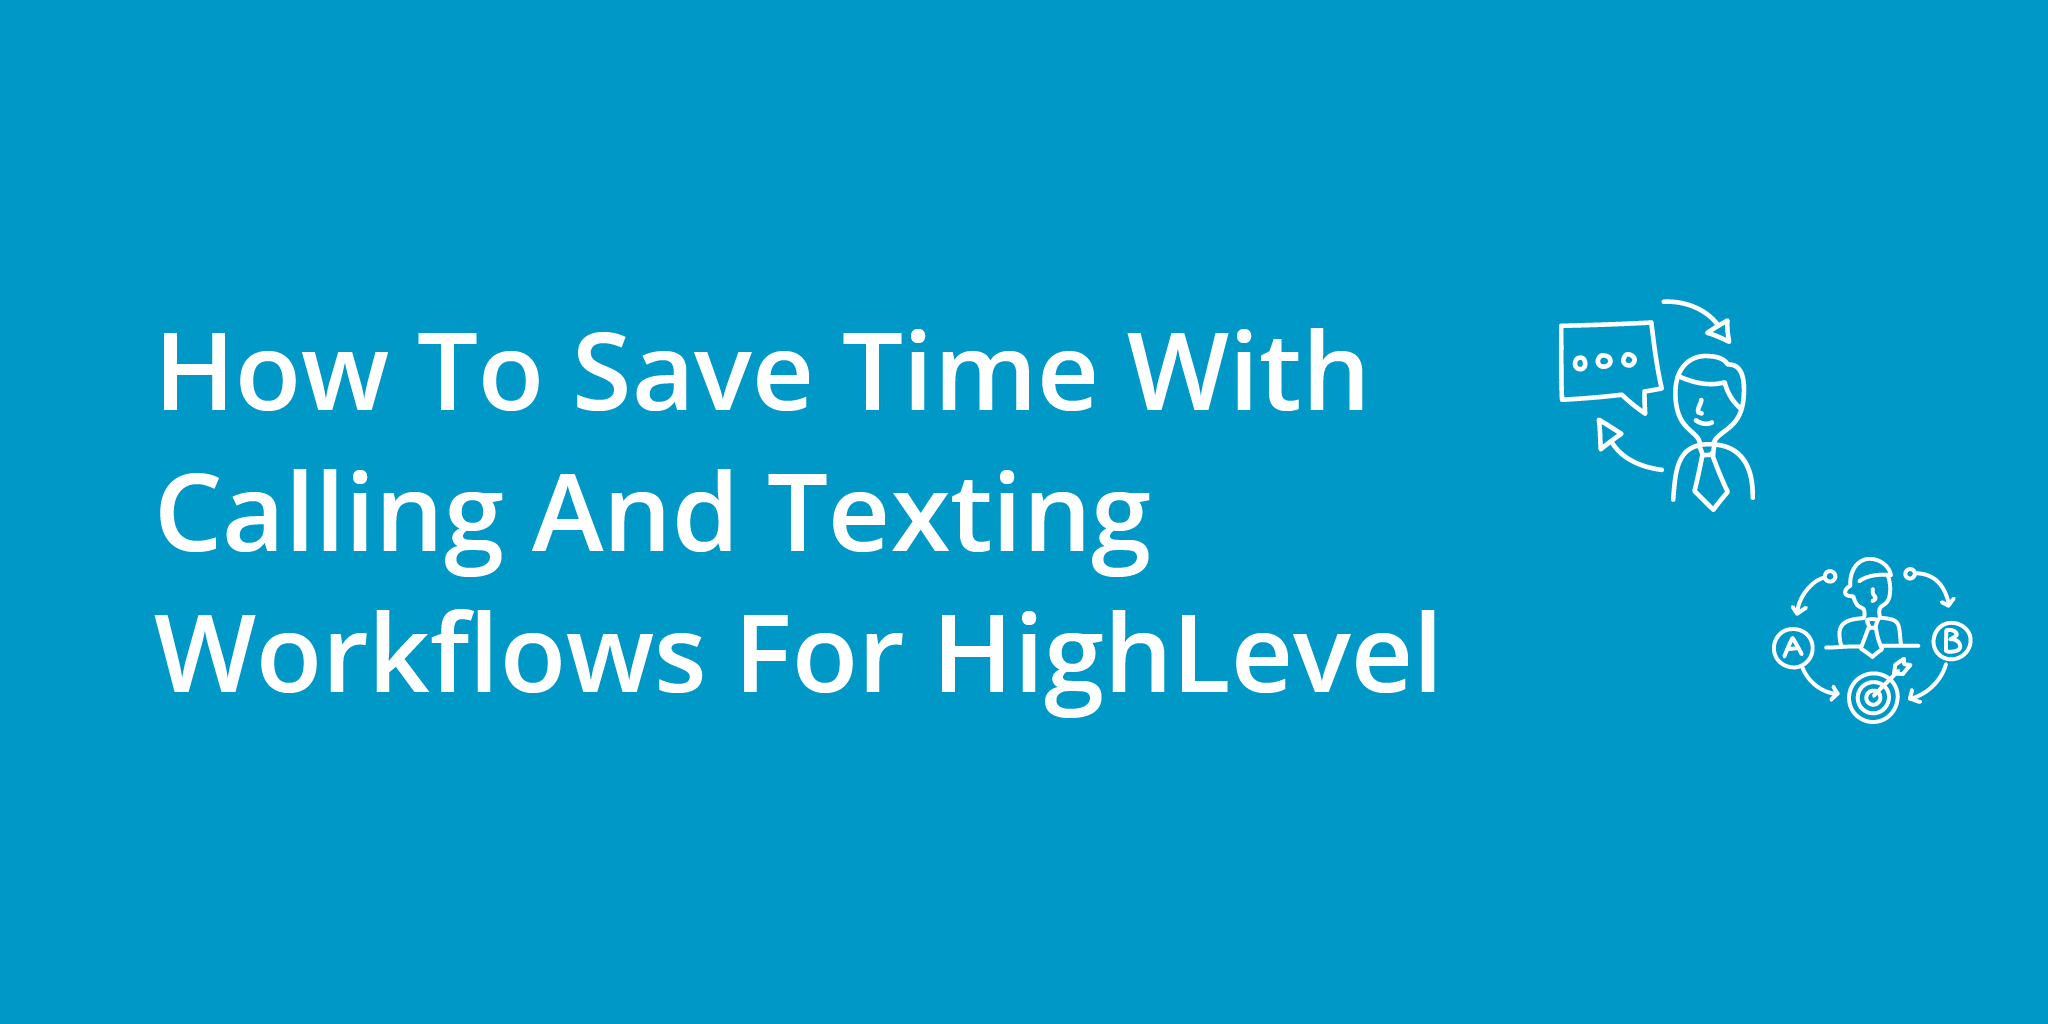 How To Save Time With Calling And Texting Workflows For HighLevel | Telephones for business